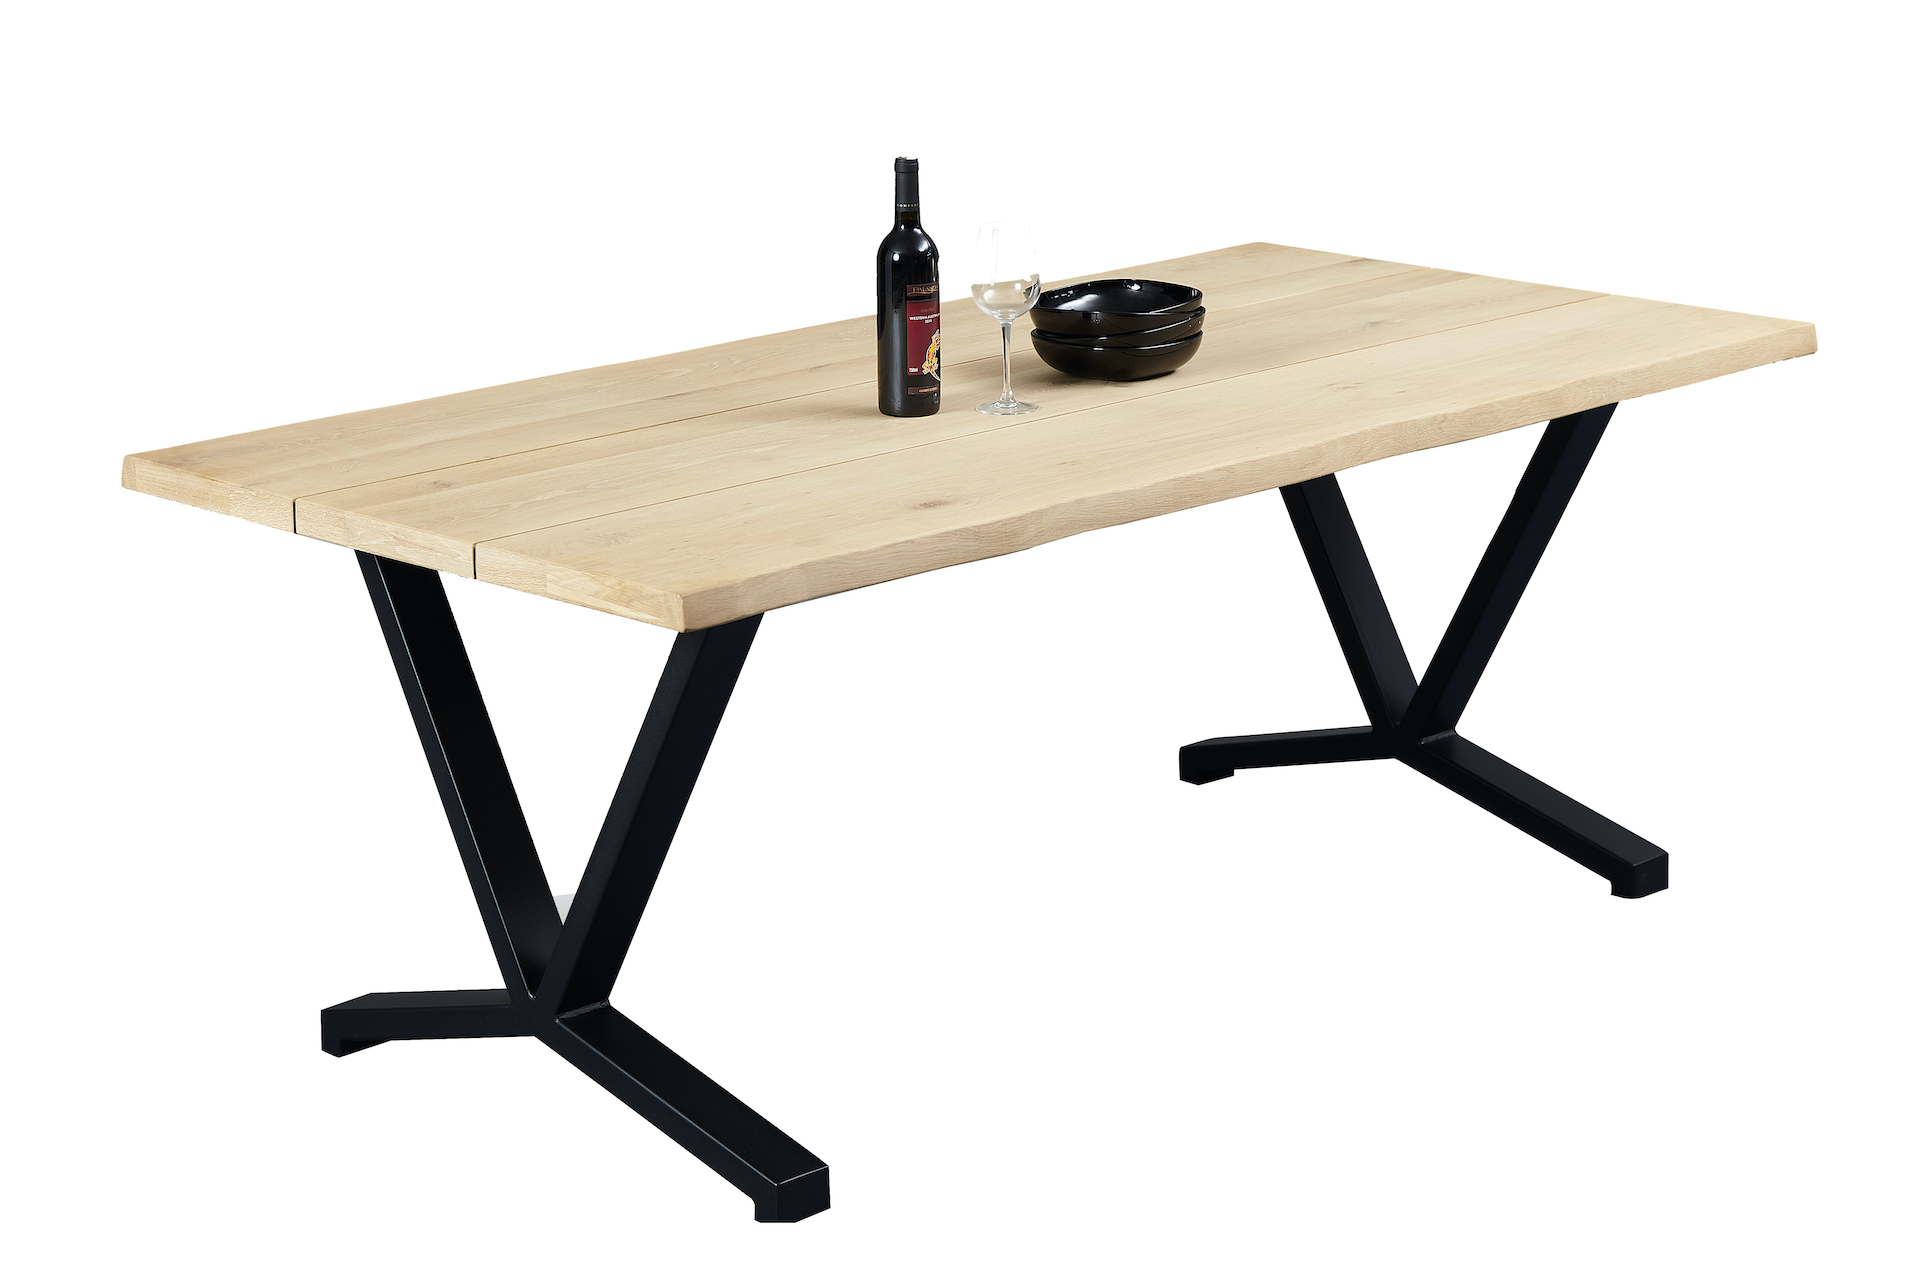 Morden furniture Solid wood Dining table for Kitchen TD-2061 Featured Image